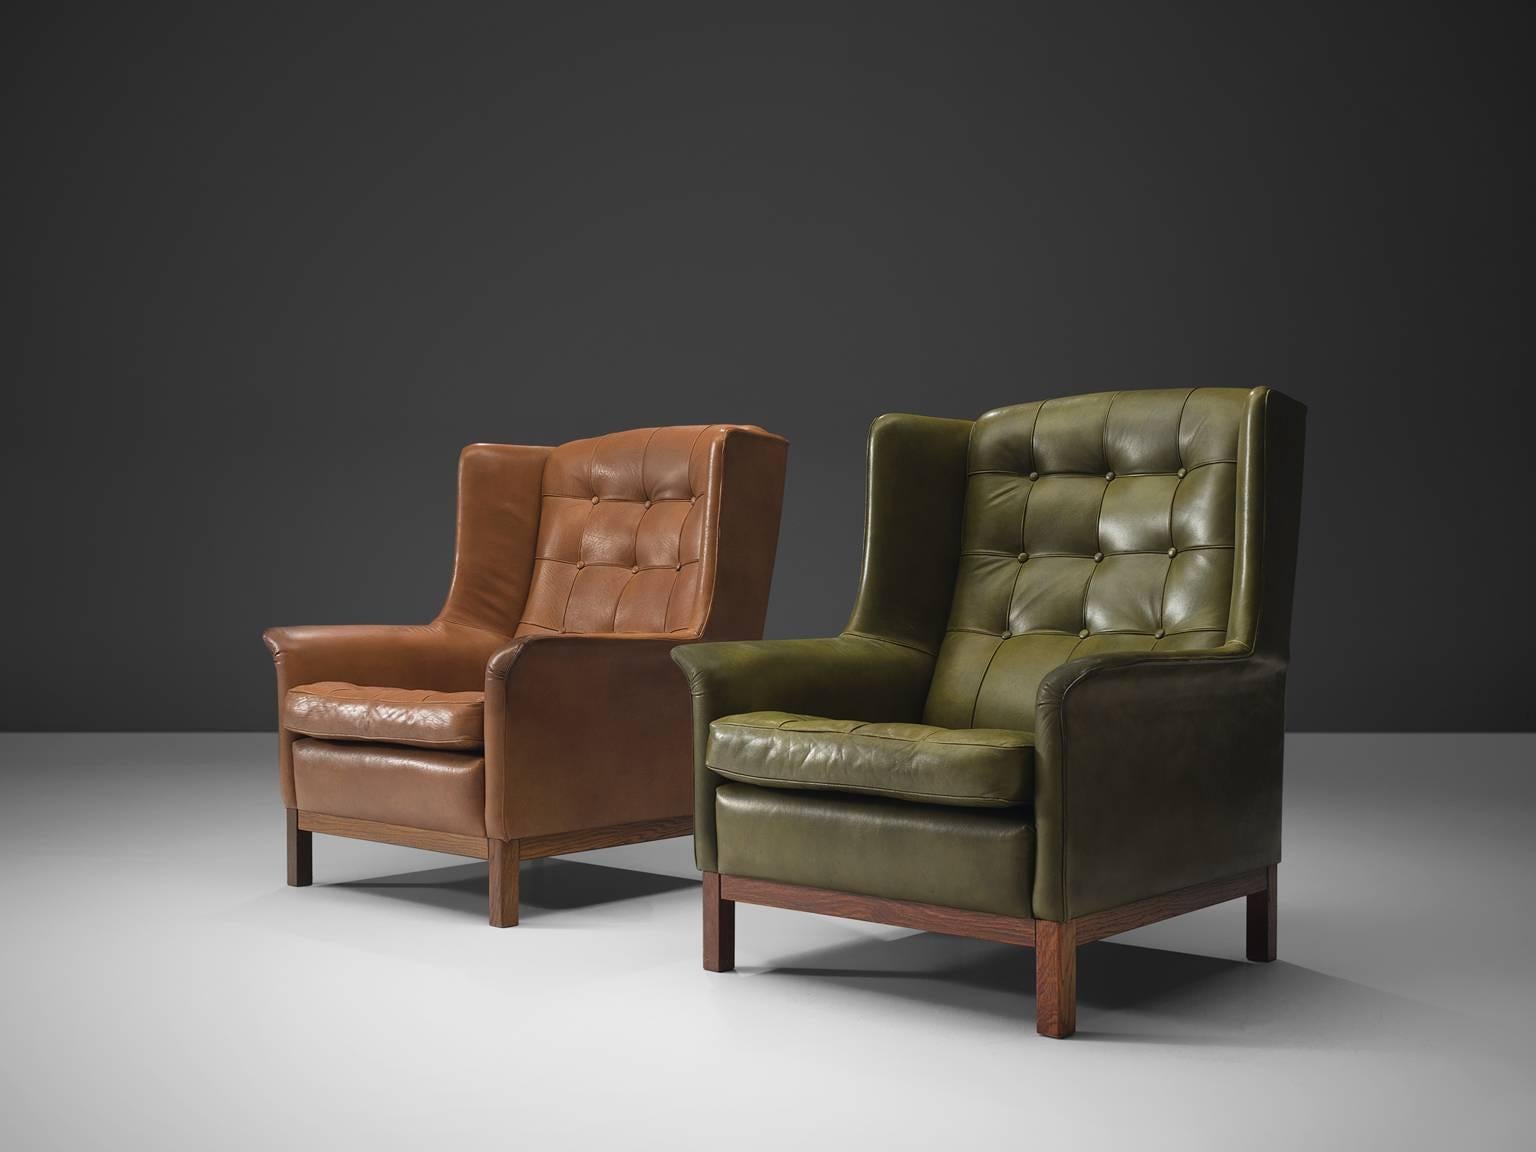 Scandinavian Modern Arne Norell High Back Chairs in Patinated Green and Cognac Leather